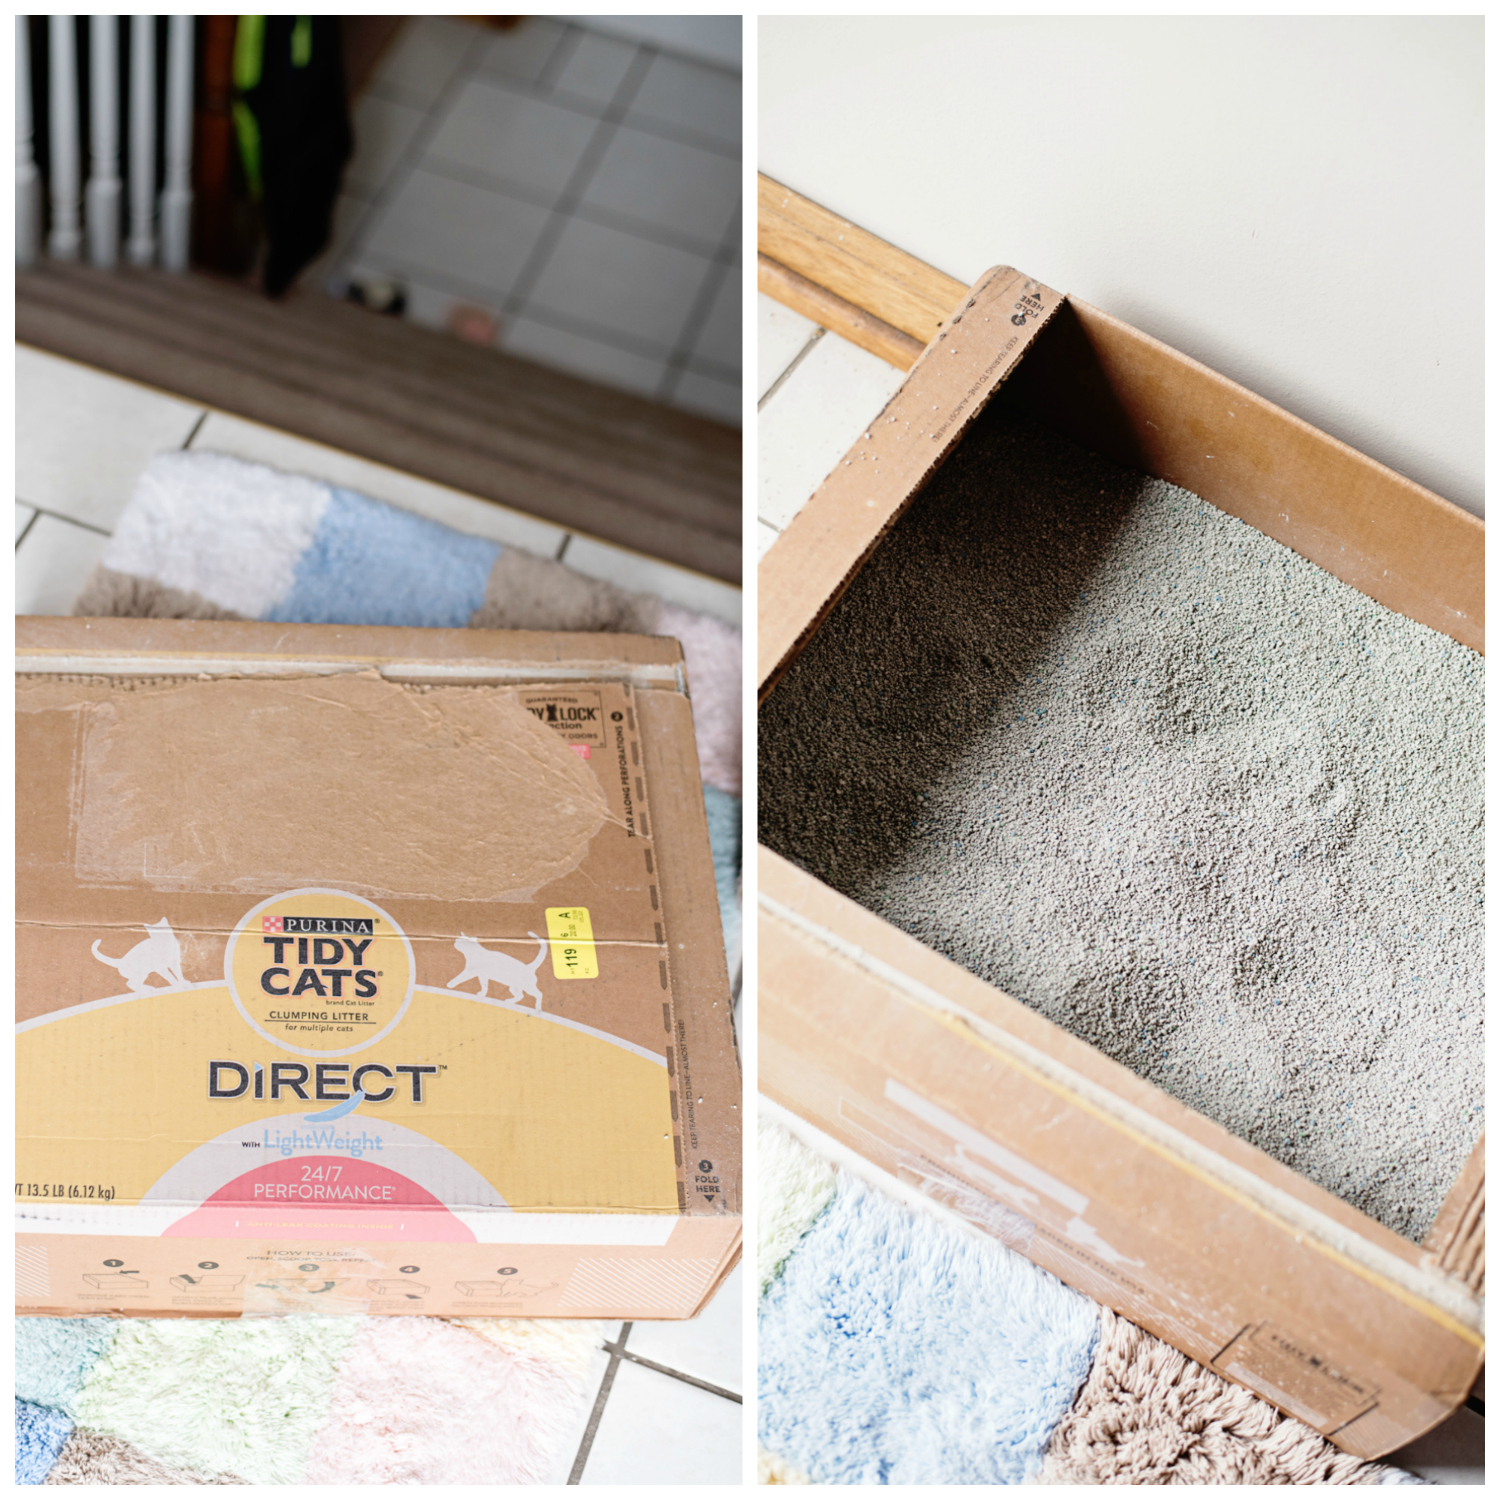 Simplify Your Cat Litter Routine with Tidy Cats Direct